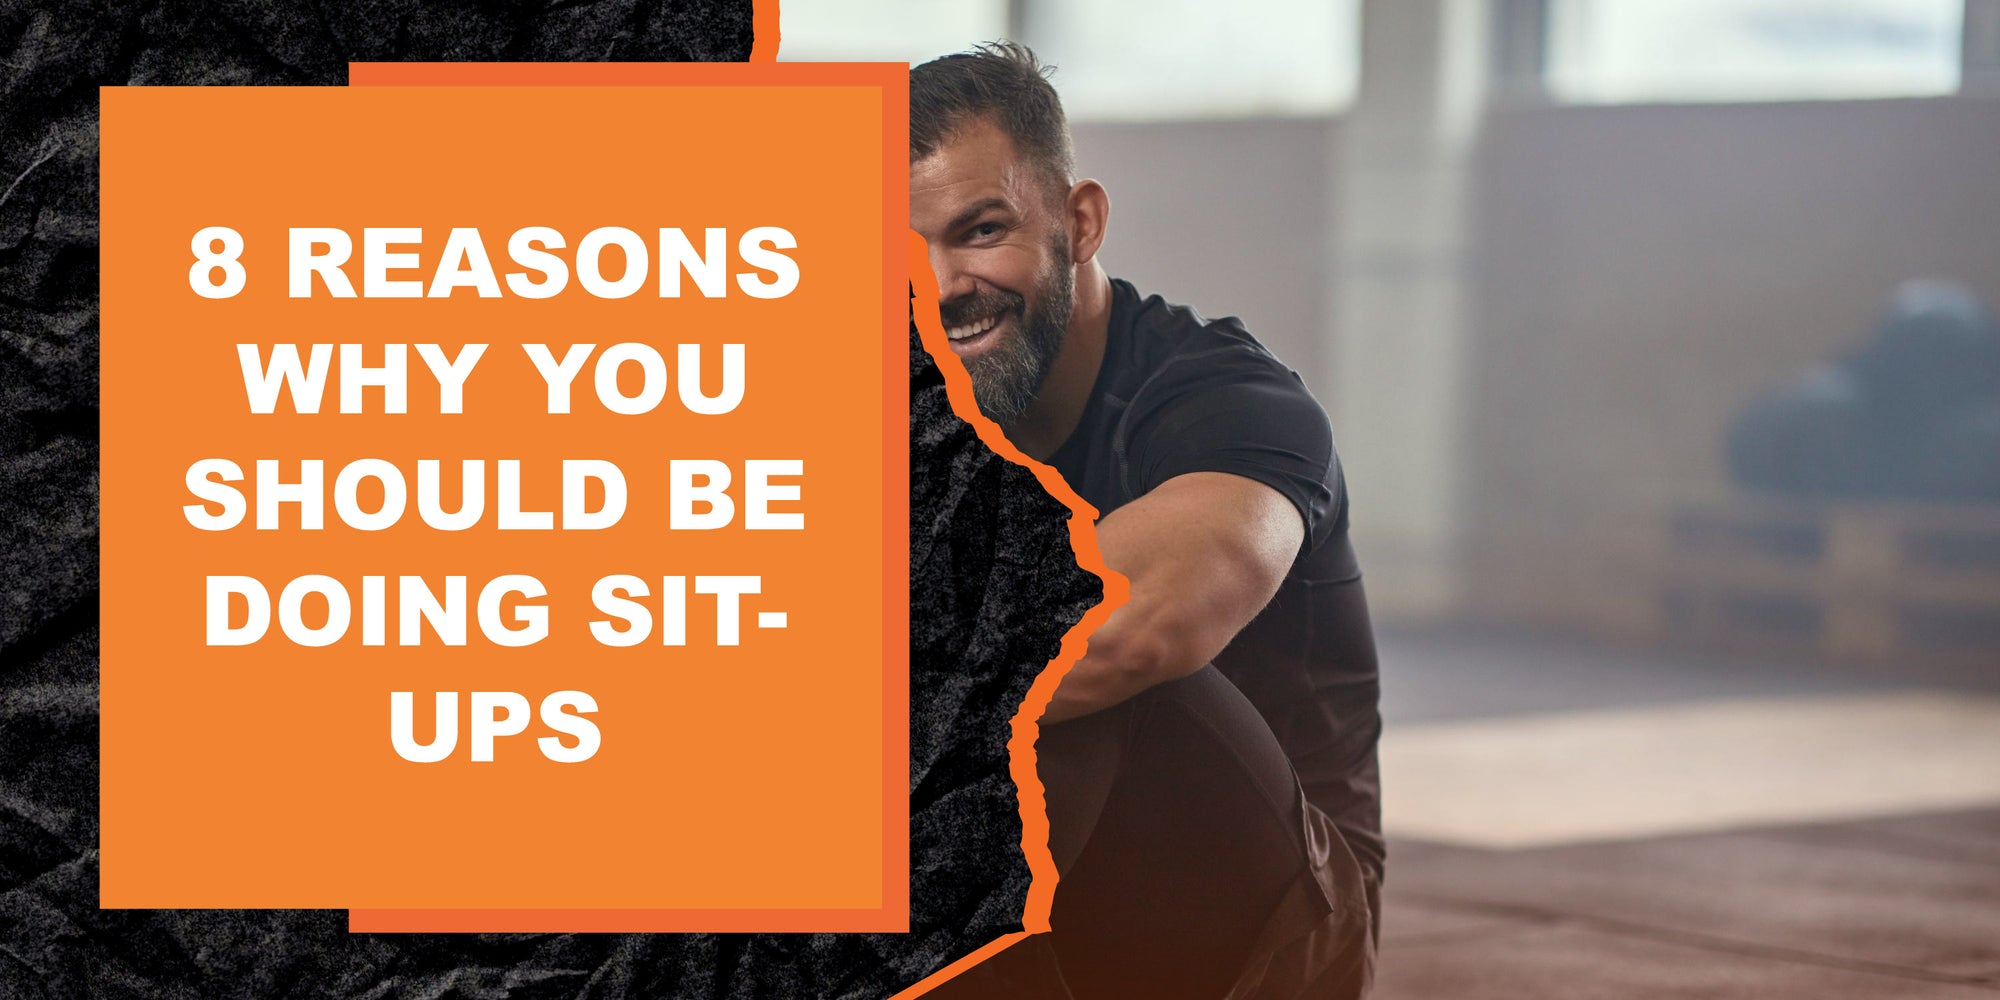 8 Reasons Why You Should Be Doing Sit-Ups